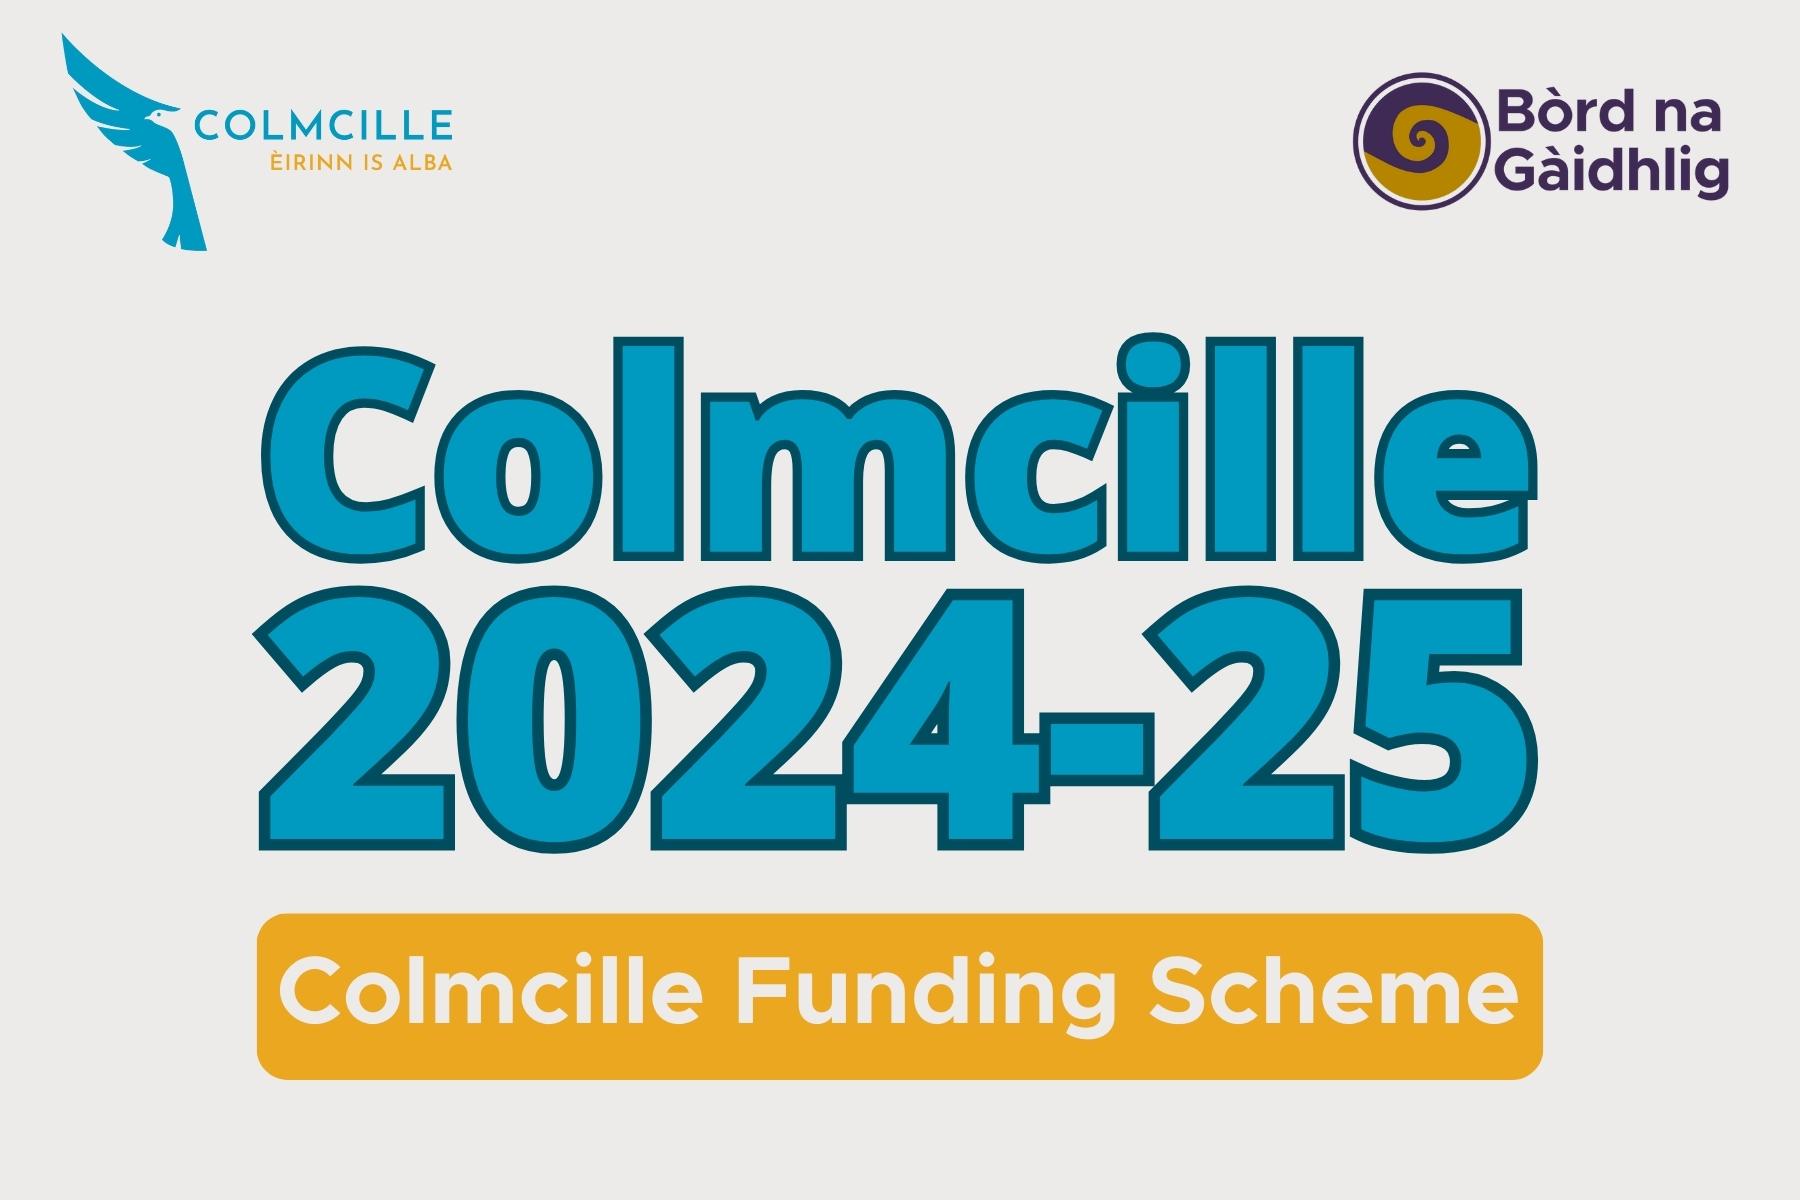 Graphic: Bold text reads 'Colmcille Funding Scheme' with Bòrd na Gàidhlig and Colmcille logos.